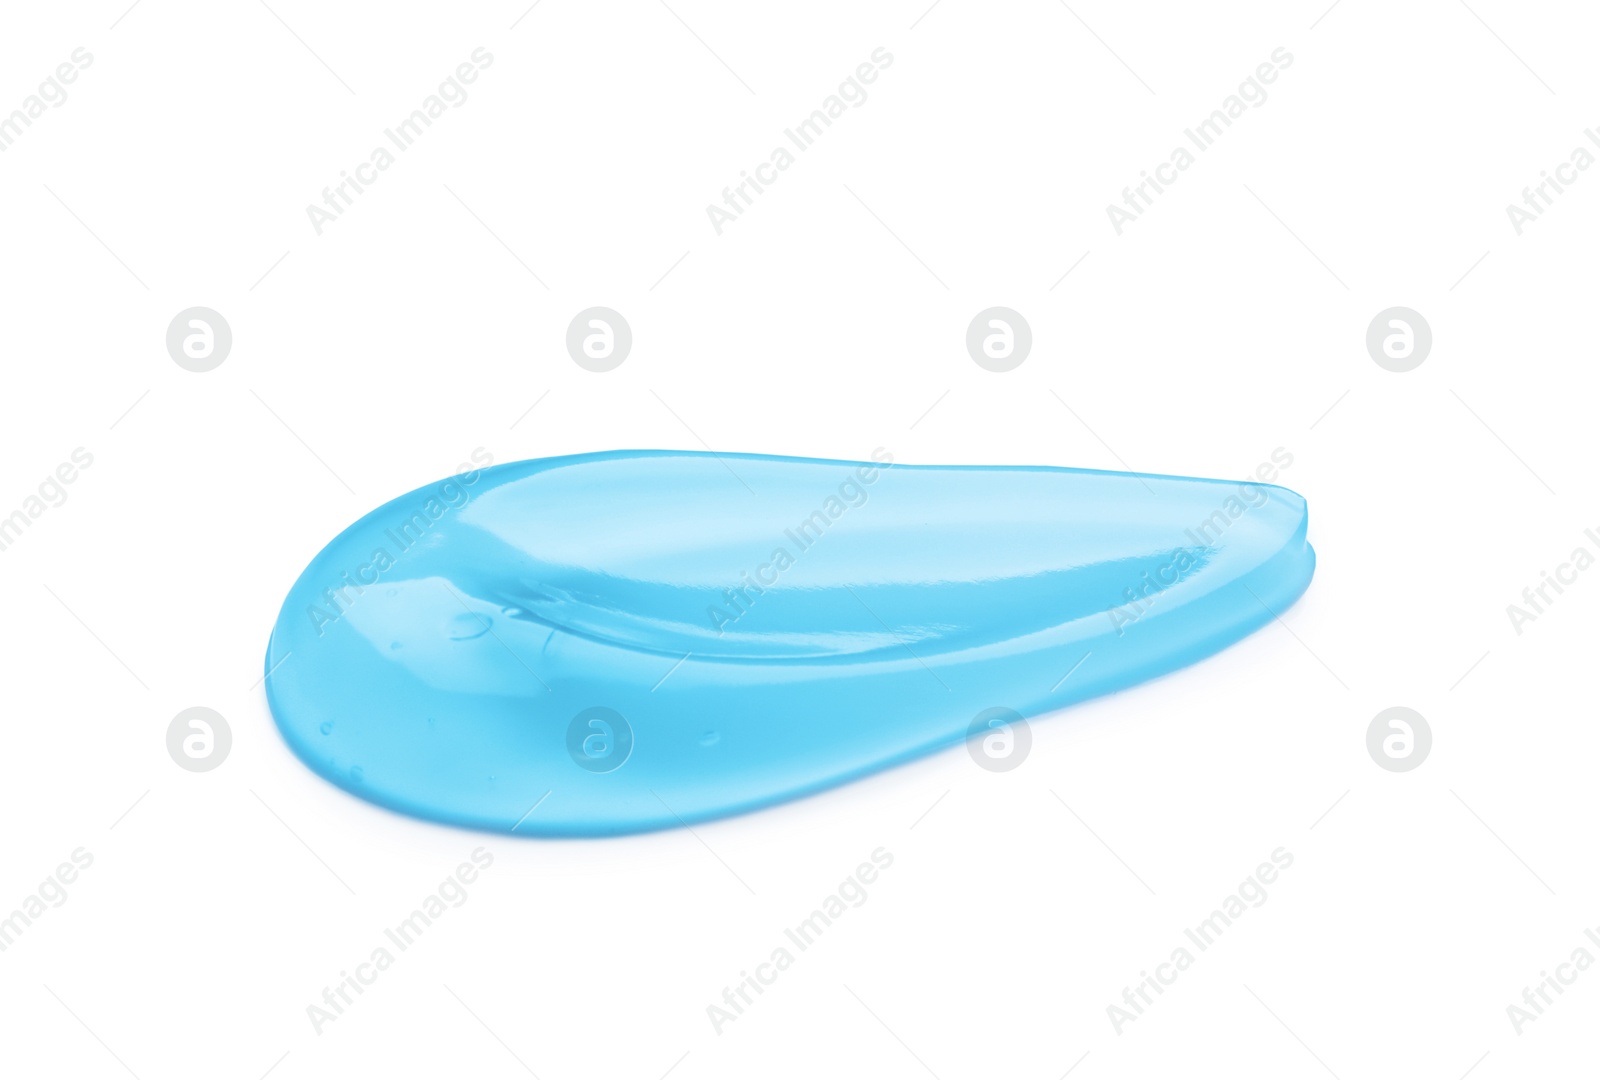 Photo of Sample of transparent cosmetic gel on white background